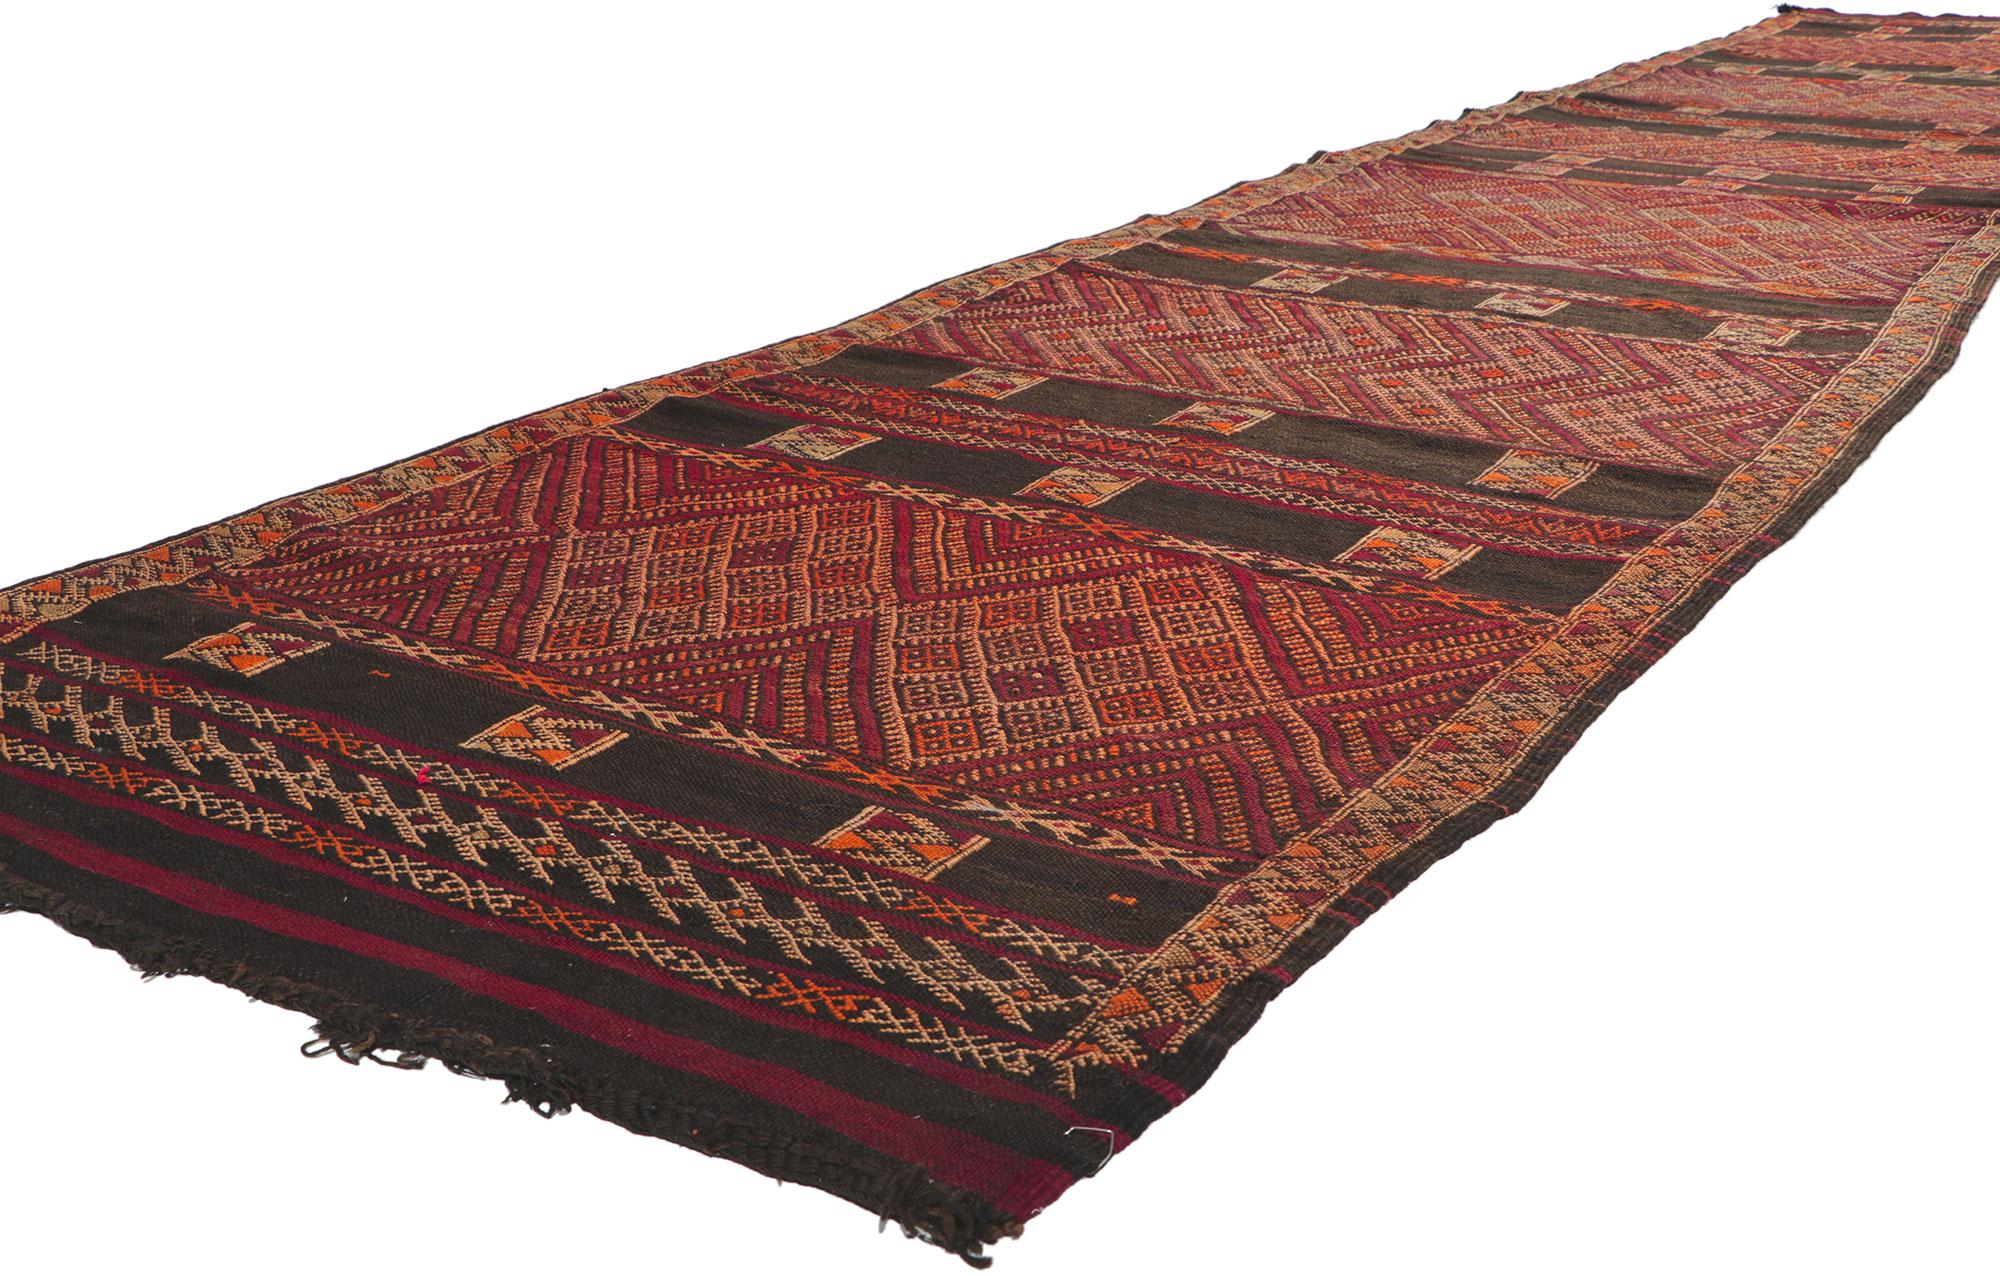 21702 Vintage Zemmour Moroccan Kilim runner, 03'09 x 18'04. Full of tiny details and nomadic charm, this hand-woven wool vintage Zemmour Berber Moroccan kilim rug runner is a captivating vision of woven beauty. The abrashed field features an allover